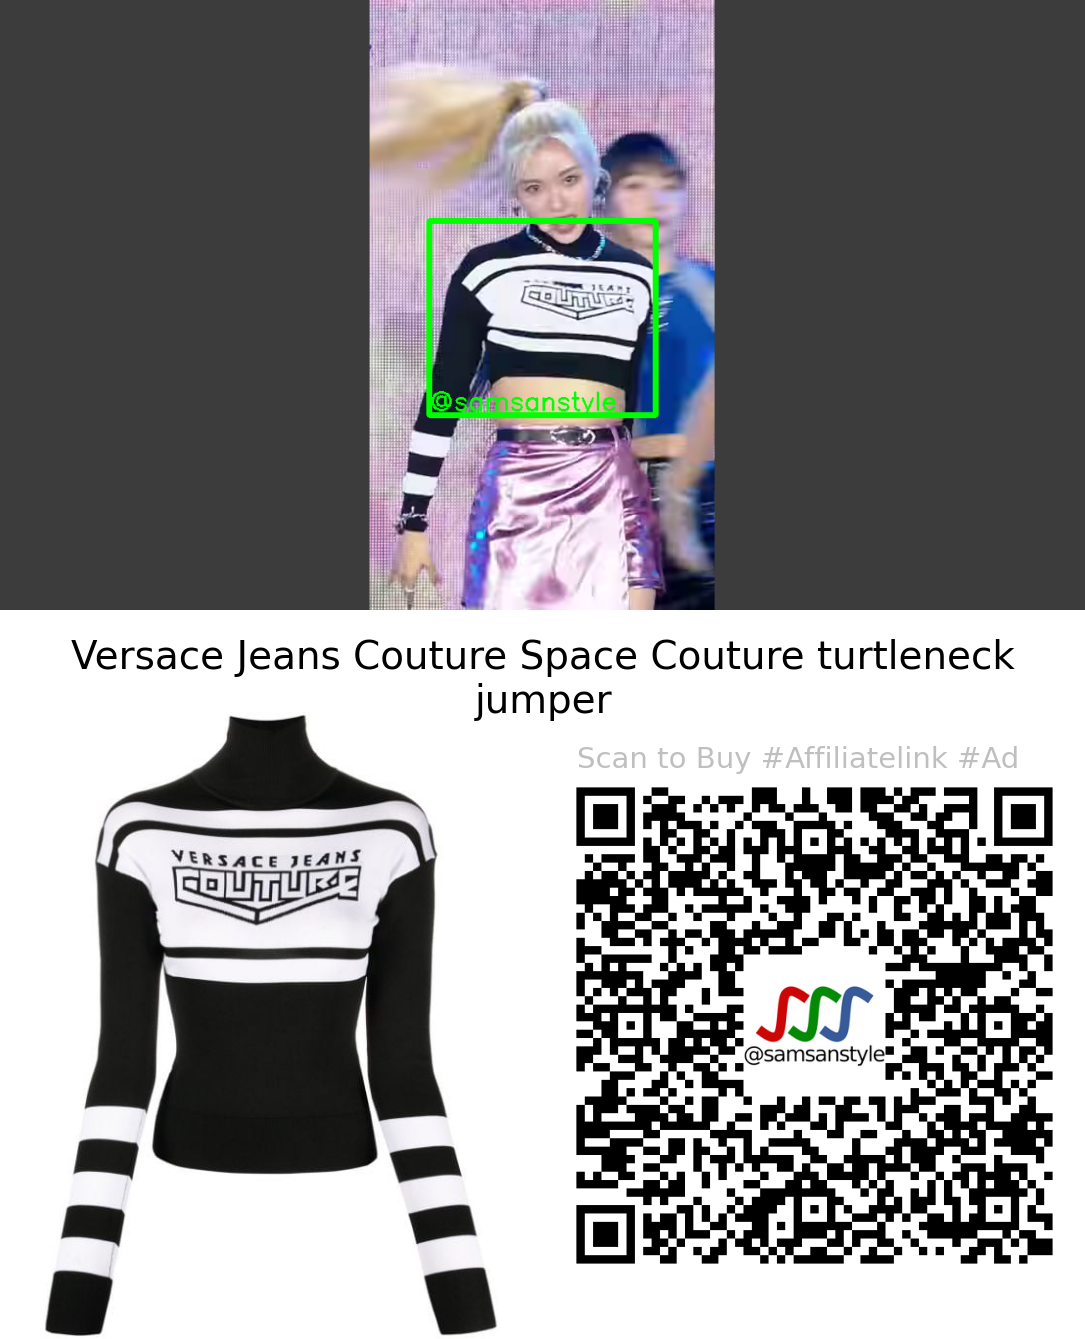 Kep1er Yeseo | We Fresh SBS MTV The Show | Versace Jeans Couture Space Couture turtleneck jumper